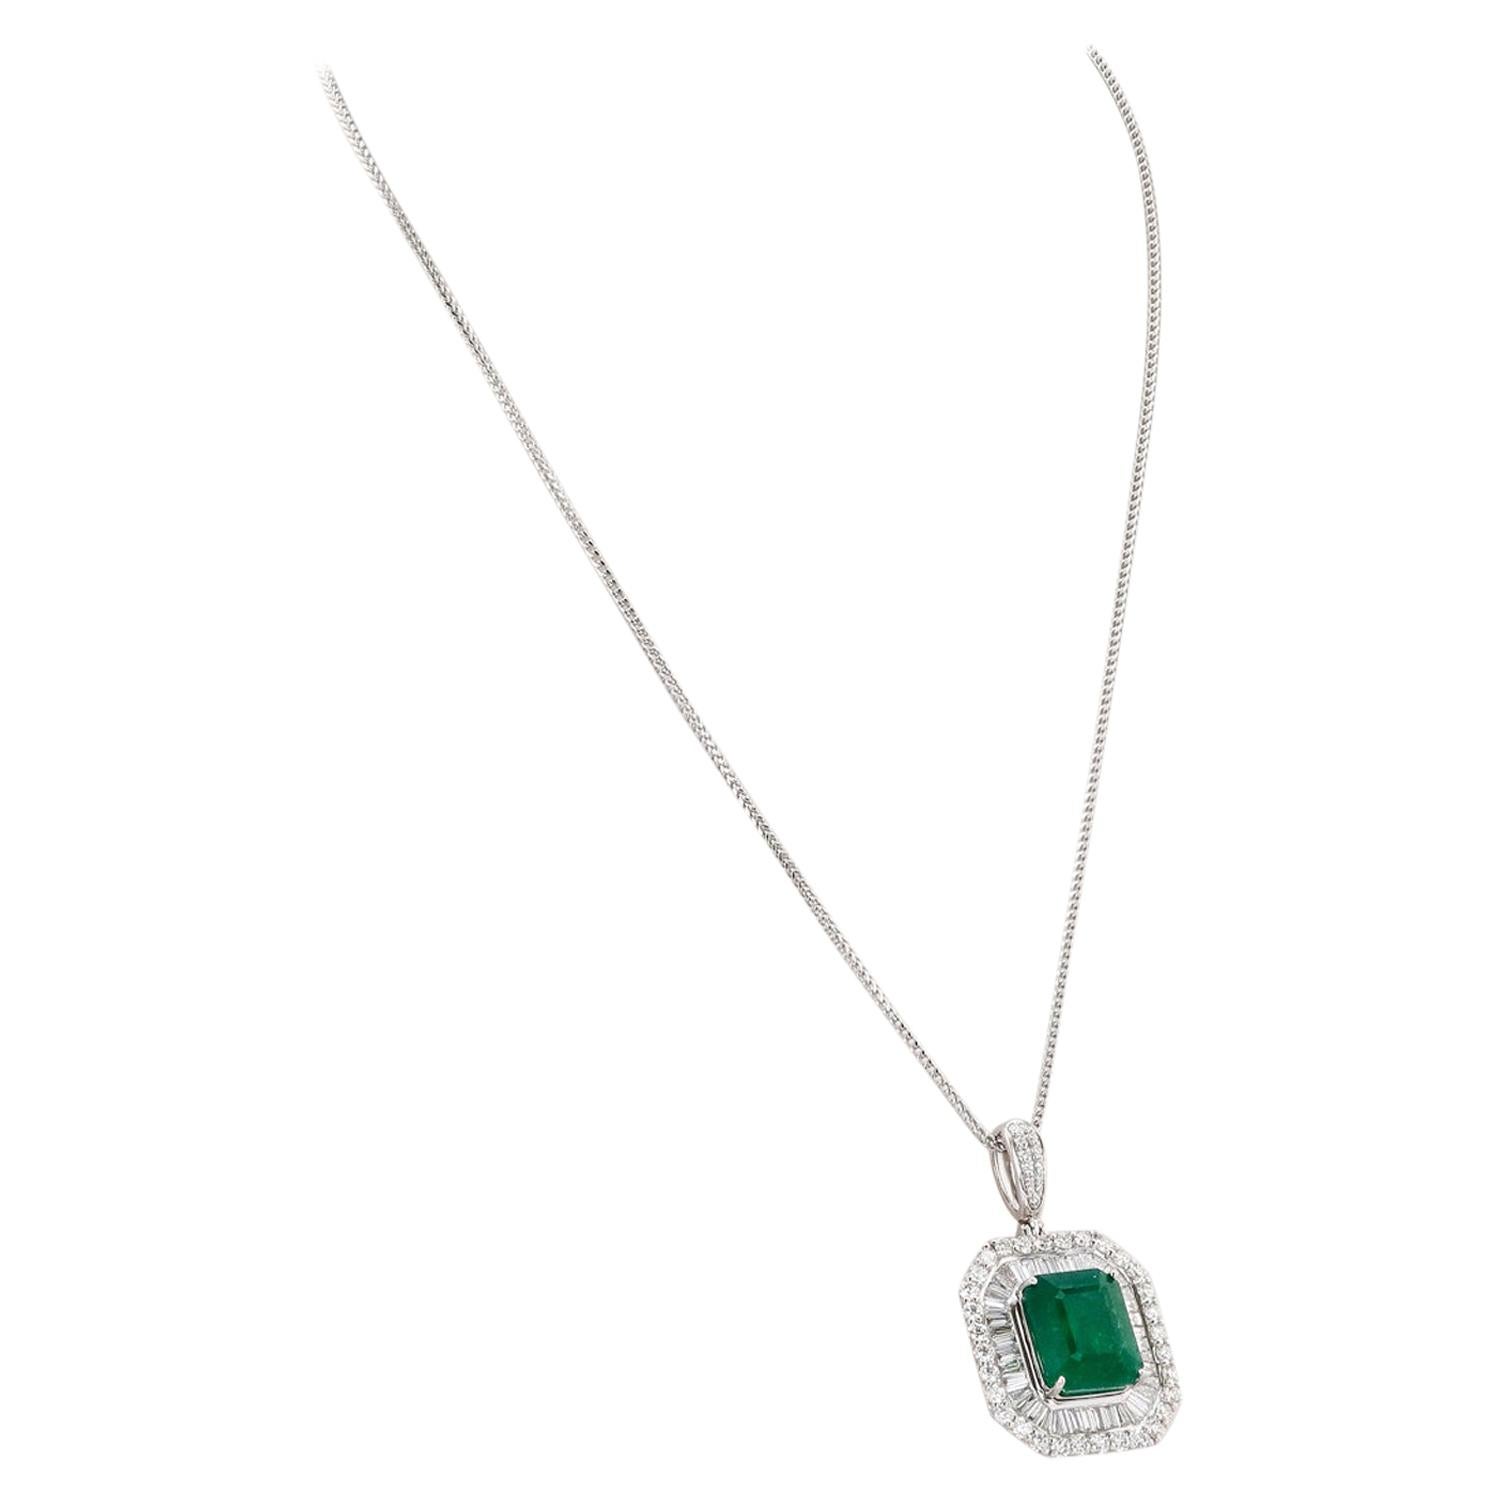 10.28ct Emerald and 3.51ctw Diamond Platinum Pendant/Necklace GIA Certified For Sale